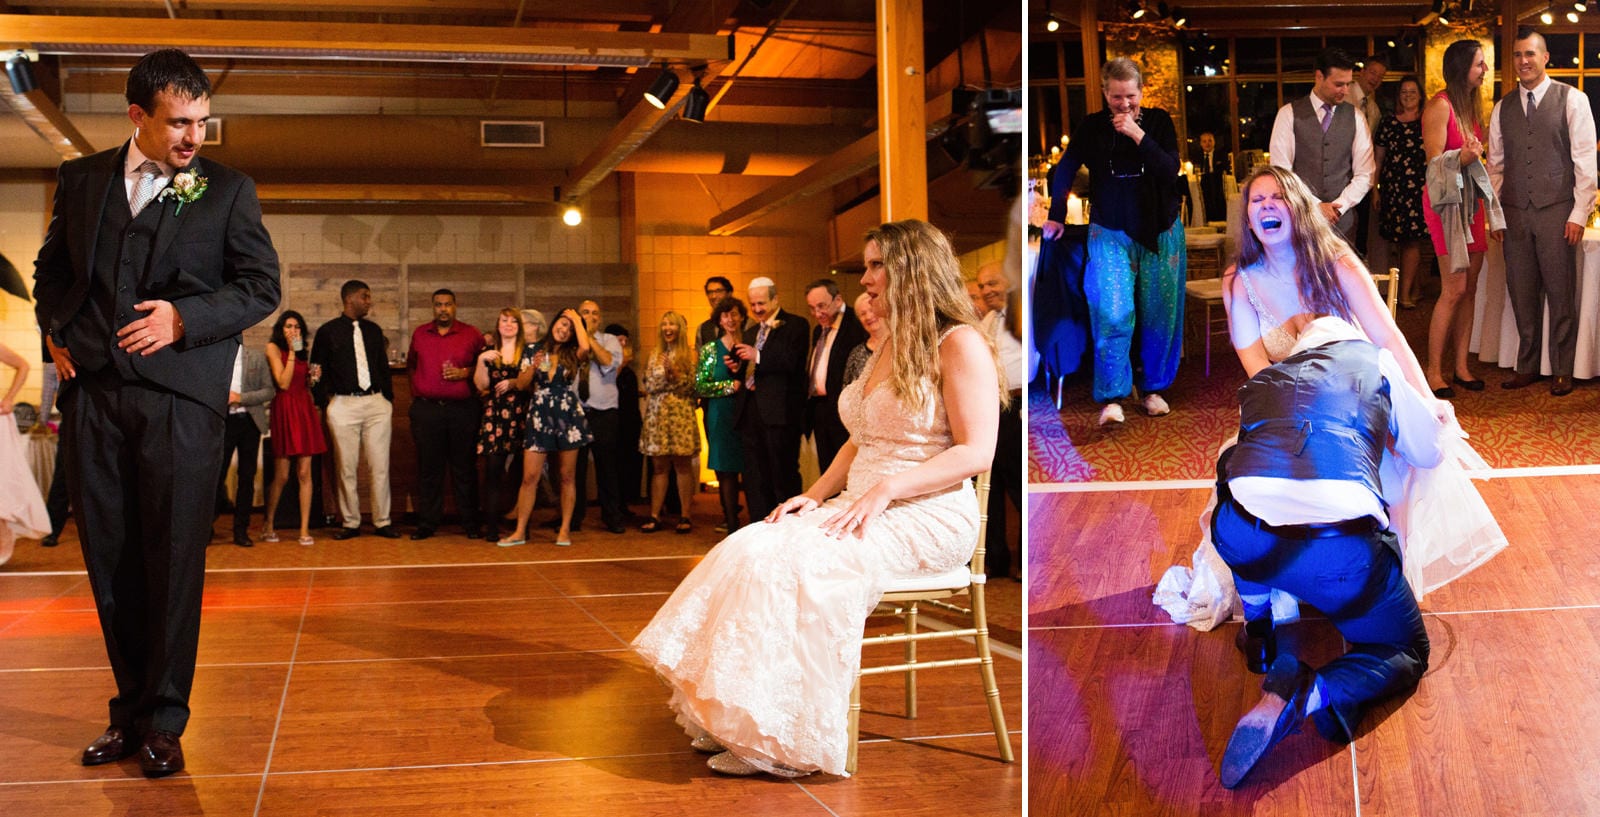 A groom stands sideways and looks dramatically at his seated bride. He then reaches under her dress to grab her garter belt while she laughs during their fall wedding at Seven Springs.